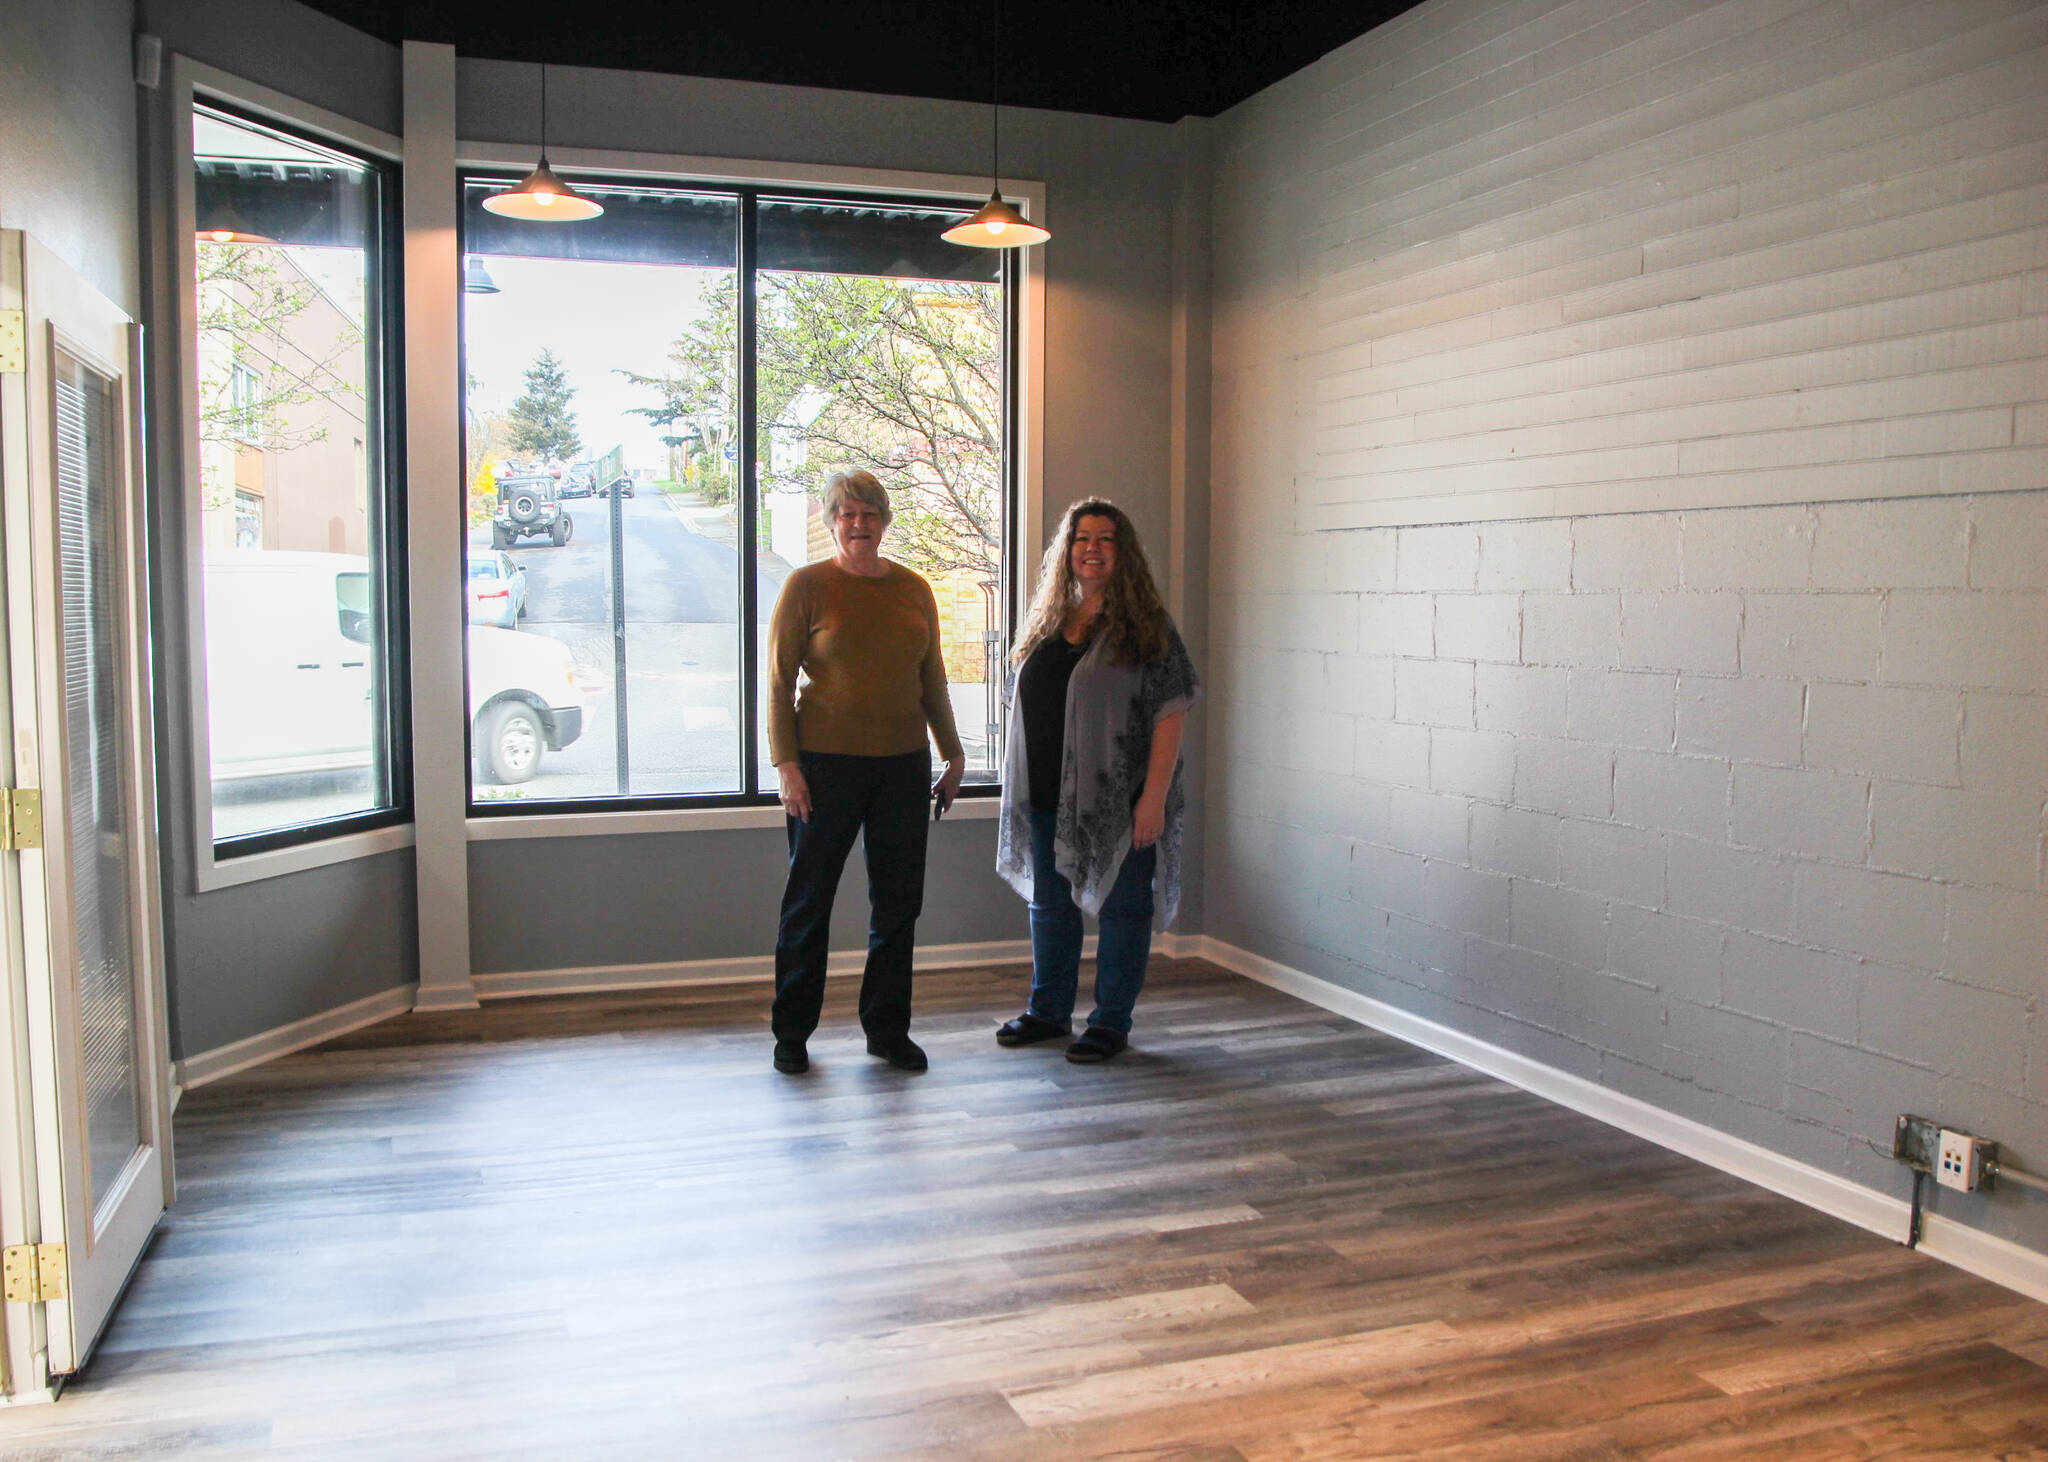 Photo by Luisa Loi
Margaret Livermore and Teresa Besaw stand in the approximately 225-square-foot business incubator at the Main Street Association’s new location on Pioneer Way.